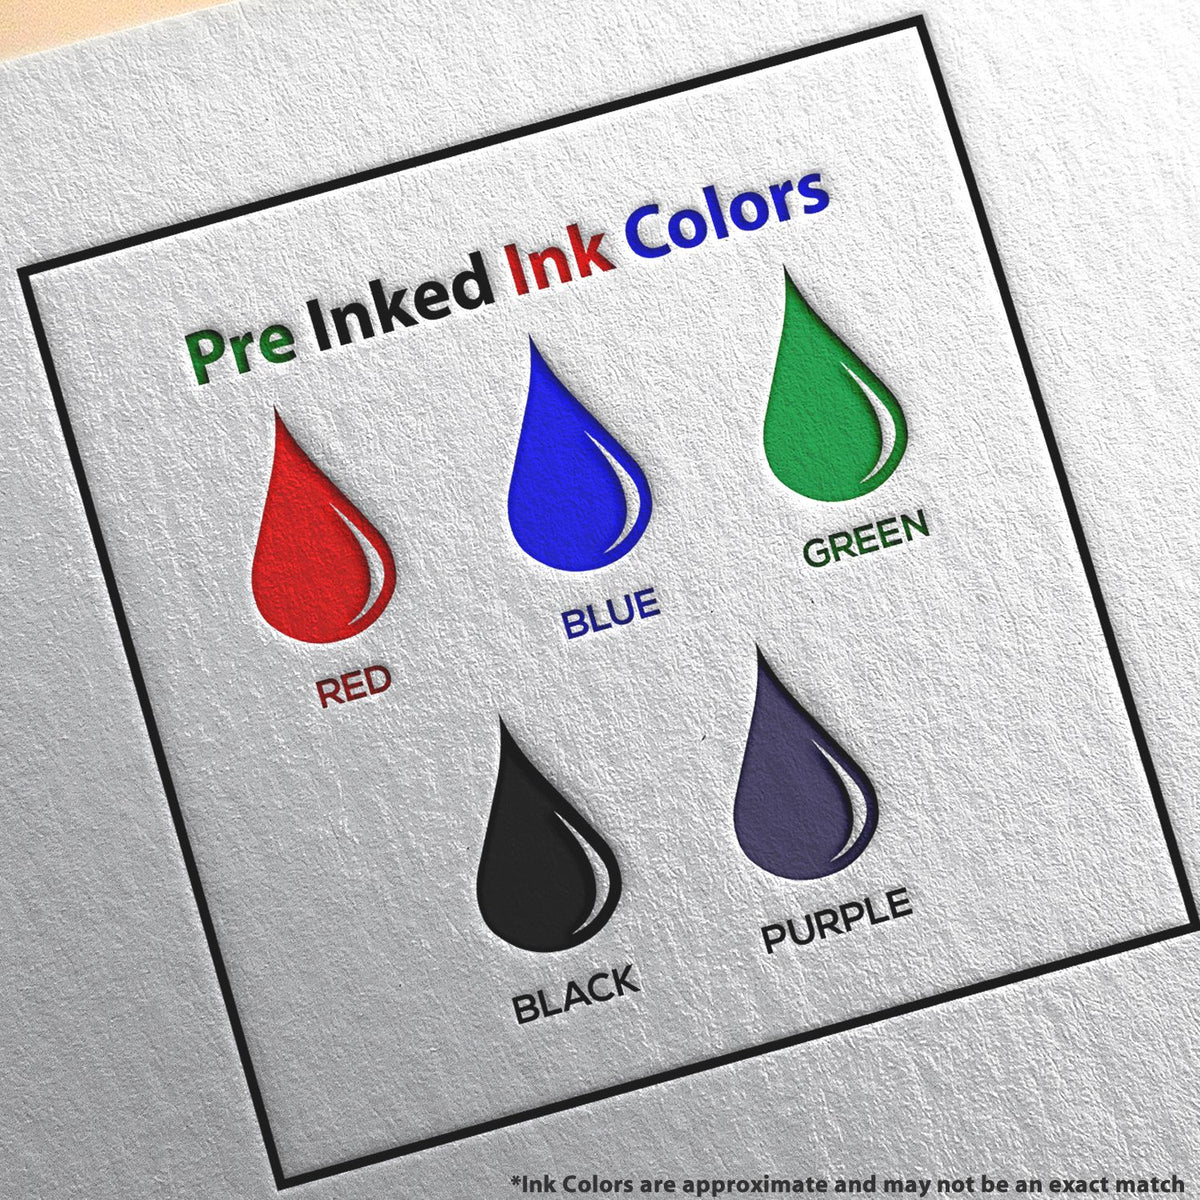 A picture showing the different ink colors or hues available for the Slim Pre-Inked Hawaii Architect Seal Stamp product.